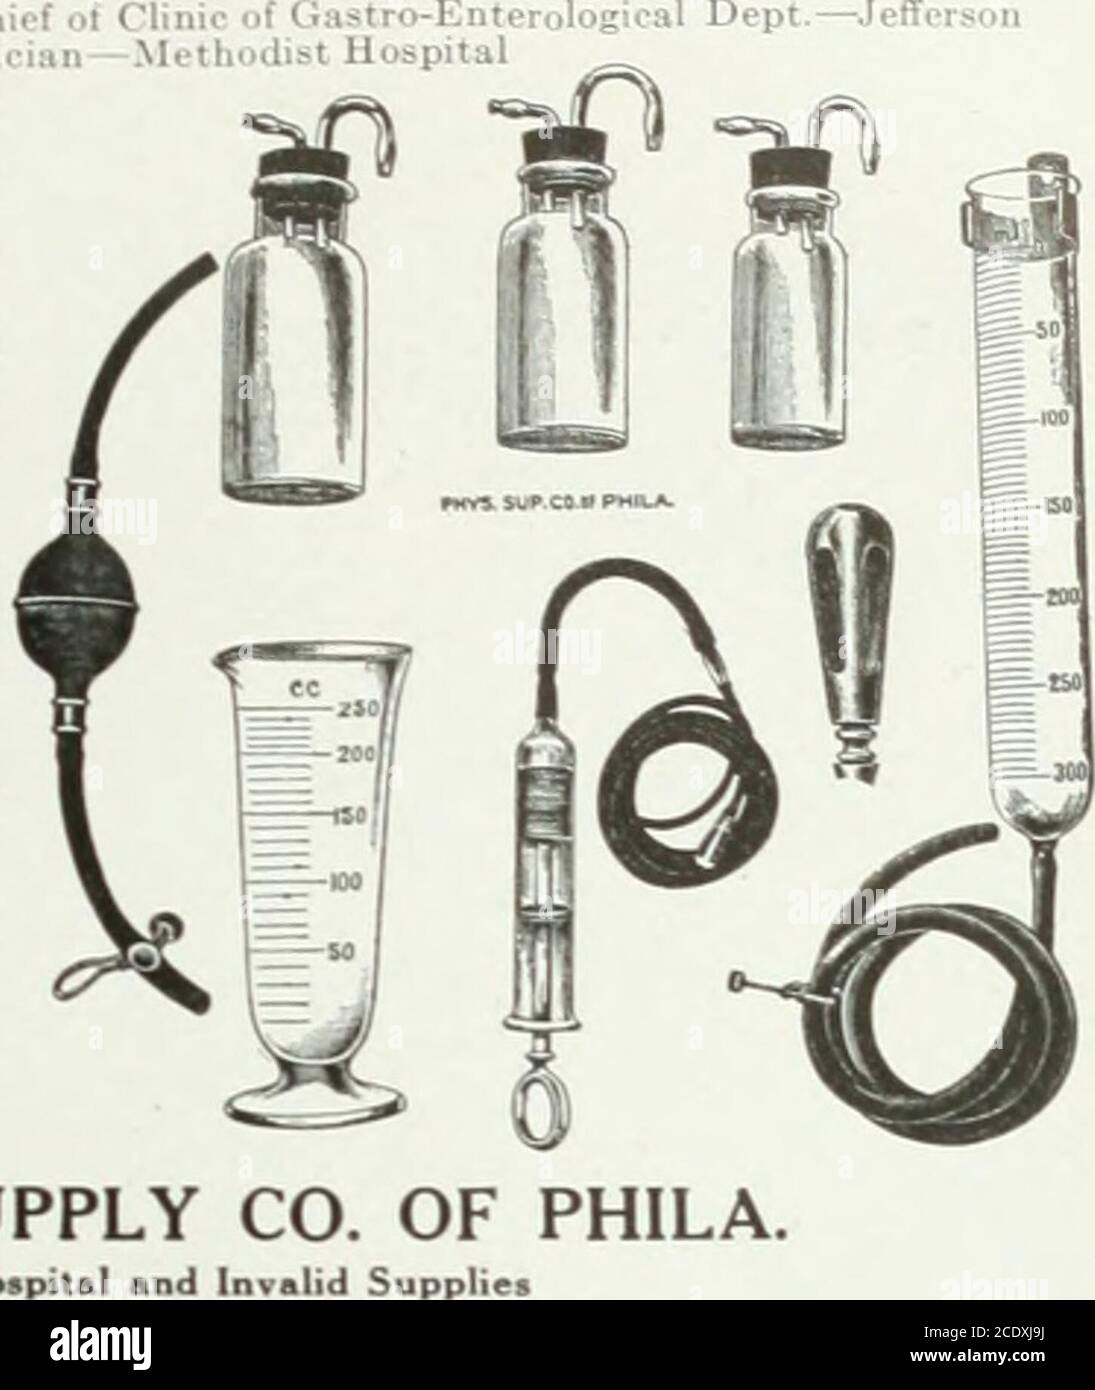 . Annals of surgery . e Special Glass moulded Rubber Duodenal Tube,graduated, with Glass Connection. One Double Neck reversed Valve Rubber Bulb, withTubing and Clamp. Three assorted size Bottles for Gall-bladder content.- One 250 CC Glass Graduate. Dnc 1 or. Glass .sbestos Packed Syringe. One :«)OCC Graduated Percolator with Metal Haut;Tubing and Cut-off. The Xeees8:iry Rubber Stoppers, Bent Glass Conne. ting Tubes, and Rubber Tubing to complete set. The Syringe with Duodenal Tube and Special I.yi.iied for the fractional exantination of gastricitents—used also as a Duodenal Feedingof llcer. C Stock Photo